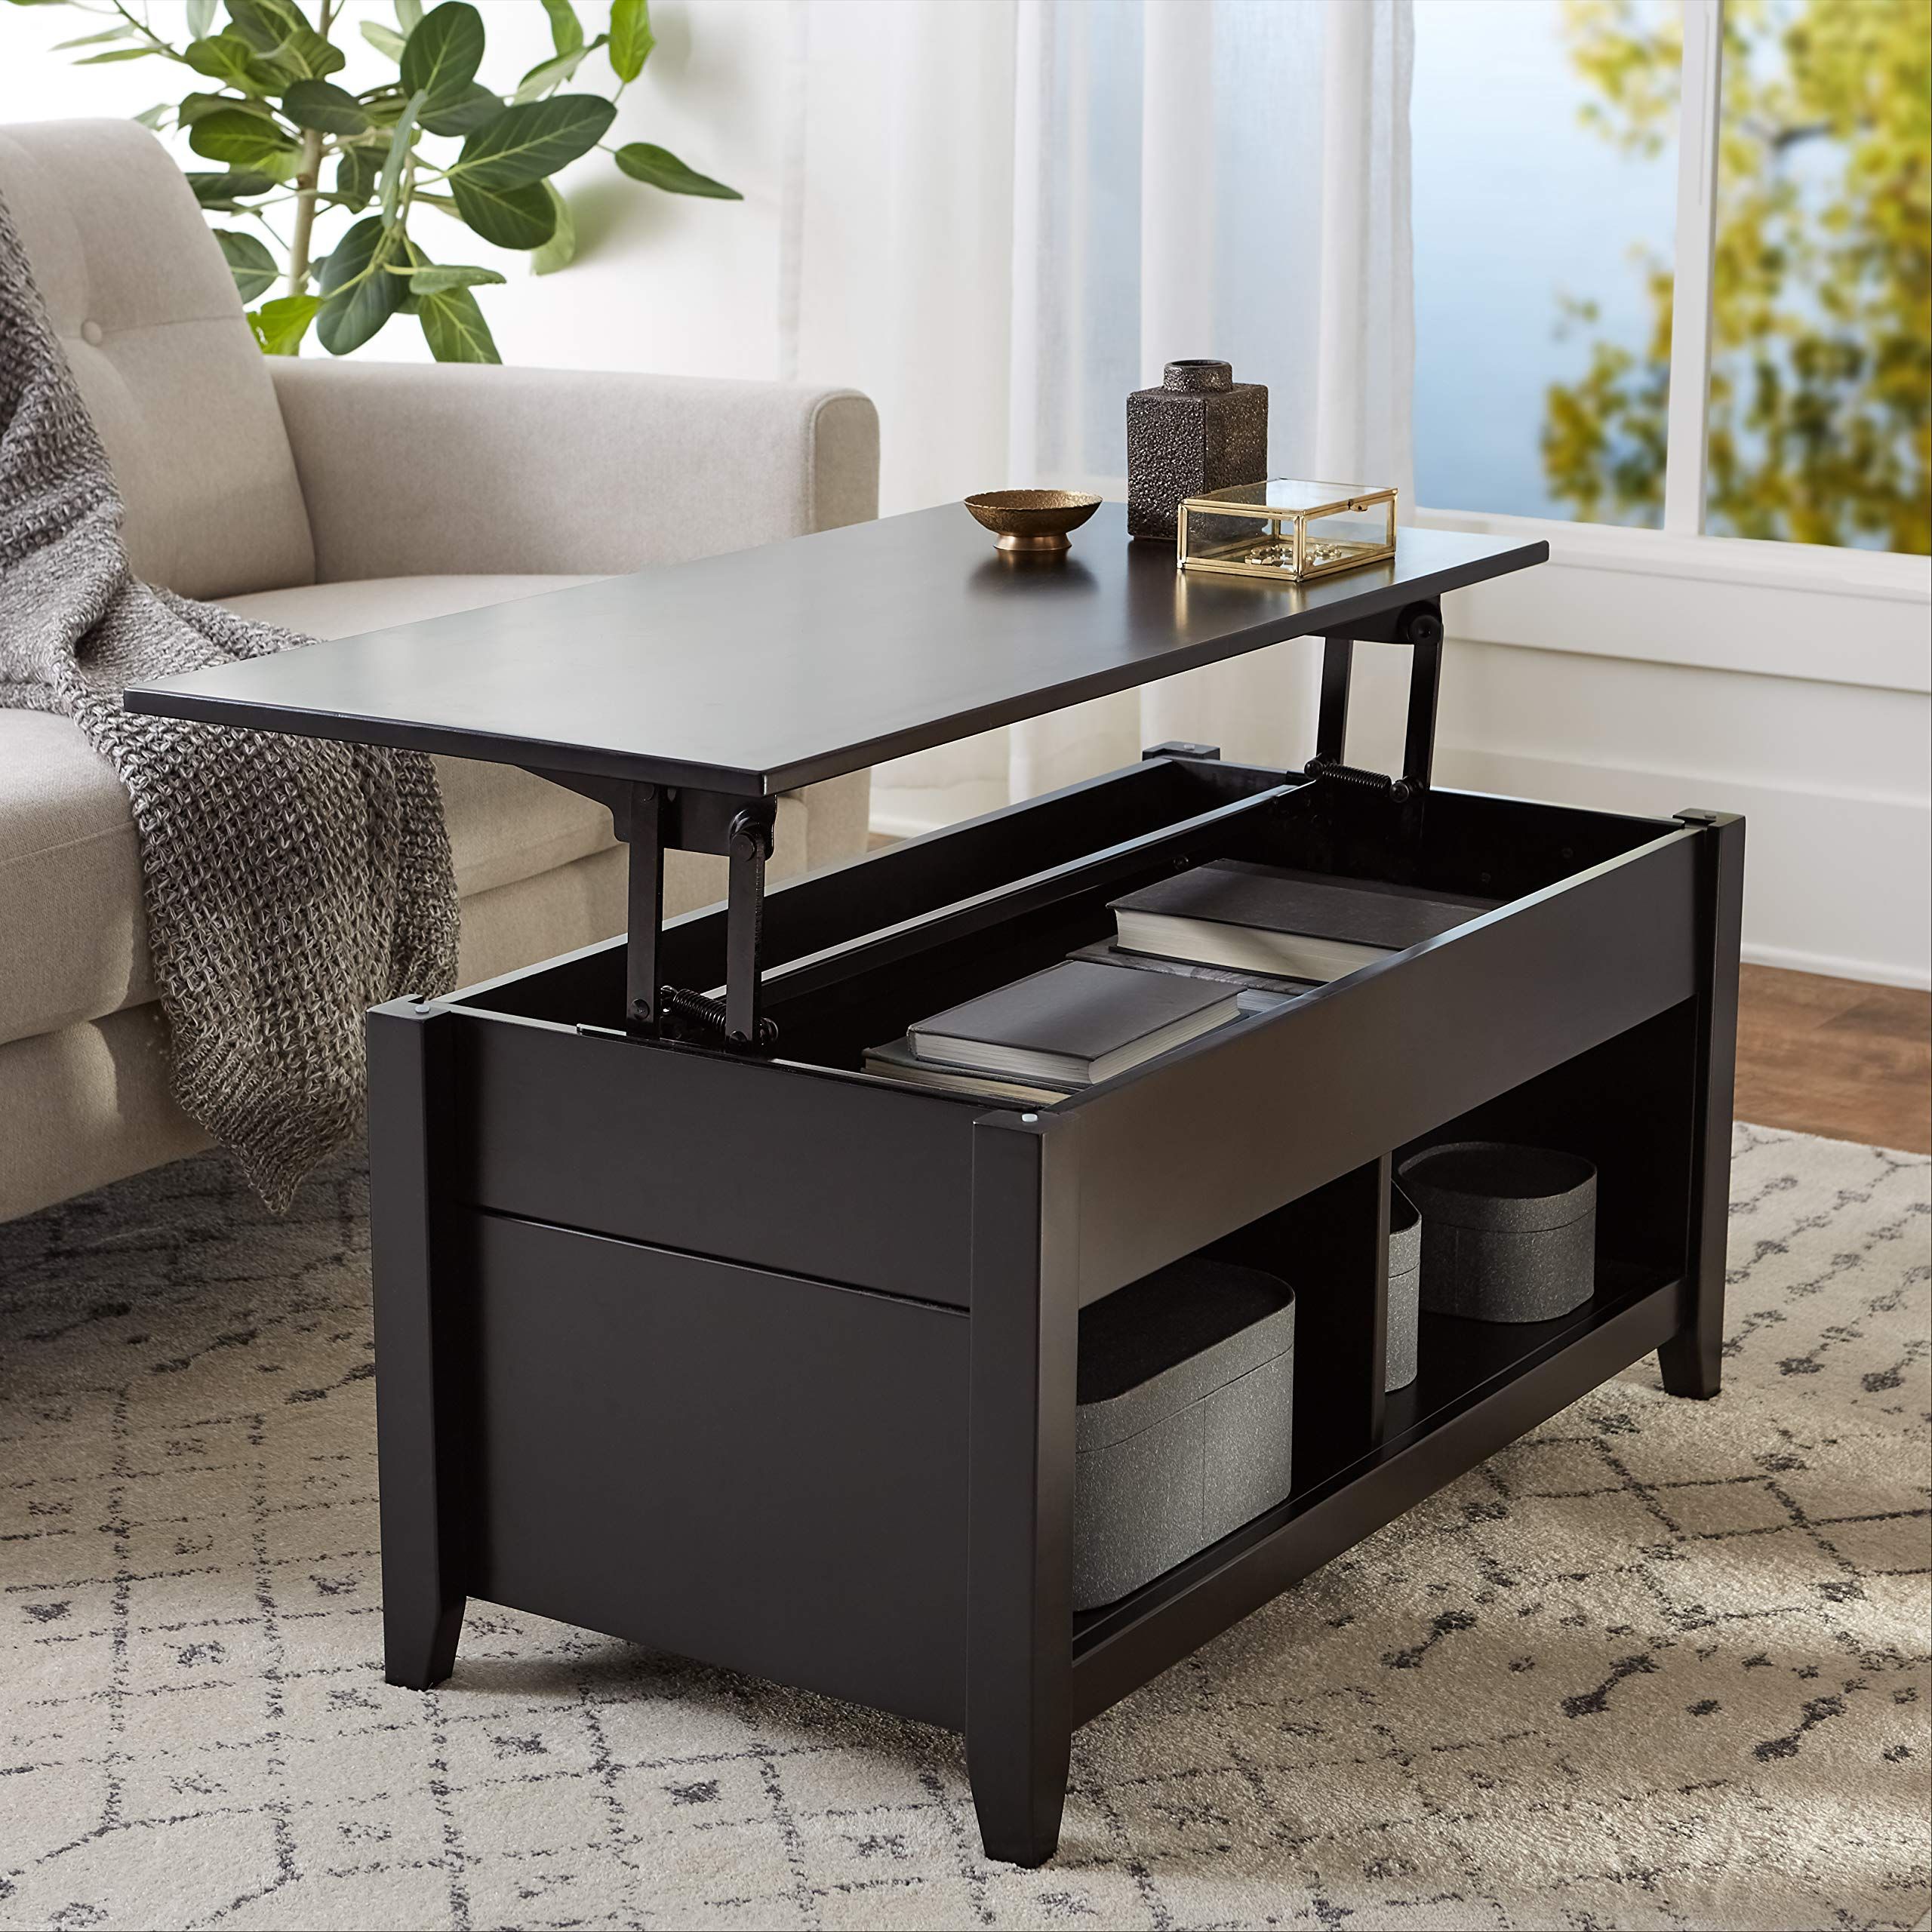 Amazon Basics Lift Top Storage Coffee Table, Black  Buy Online In Japan With Regard To Most Recently Released Lift Top Coffee Tables With Storage Drawers (View 12 of 15)